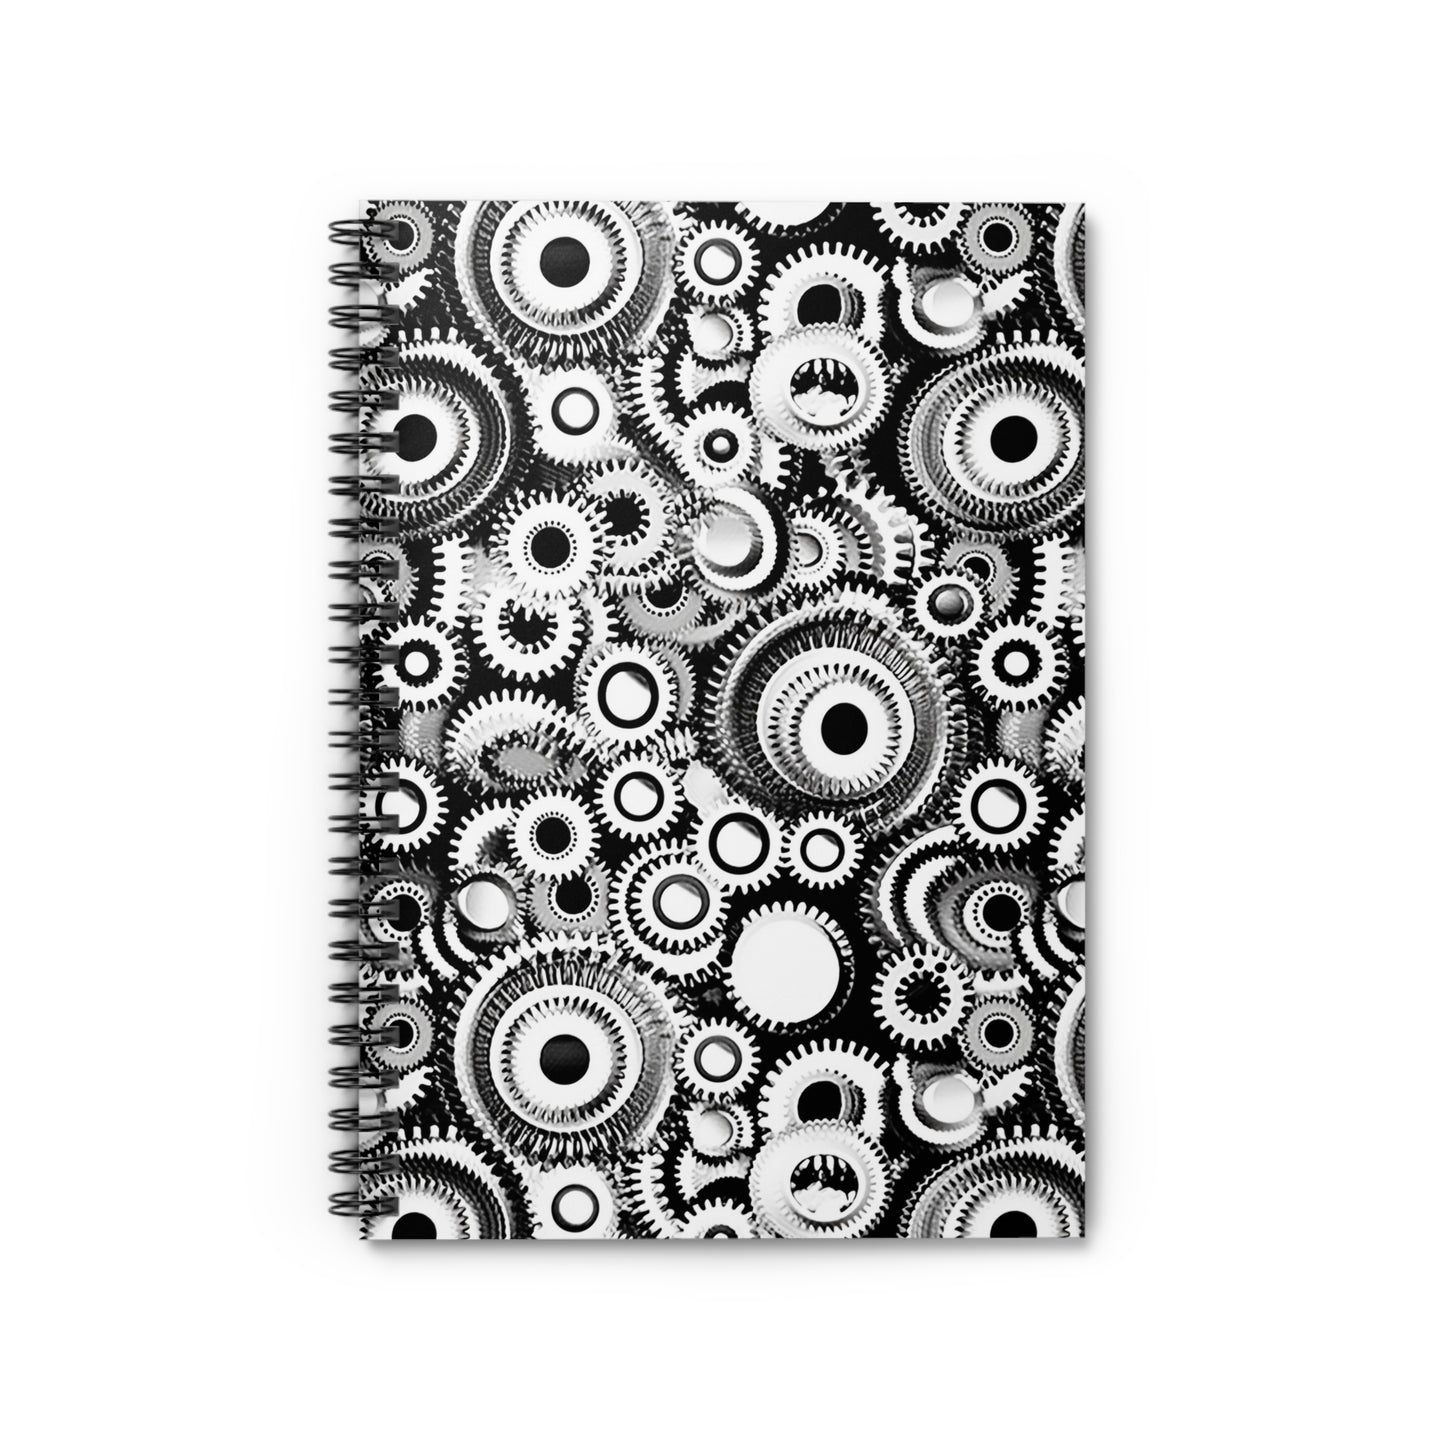 Gears Pattern Notebook (4) - Composition Notebook, Spiral Notebook, Journal for Writing and Note-Taking